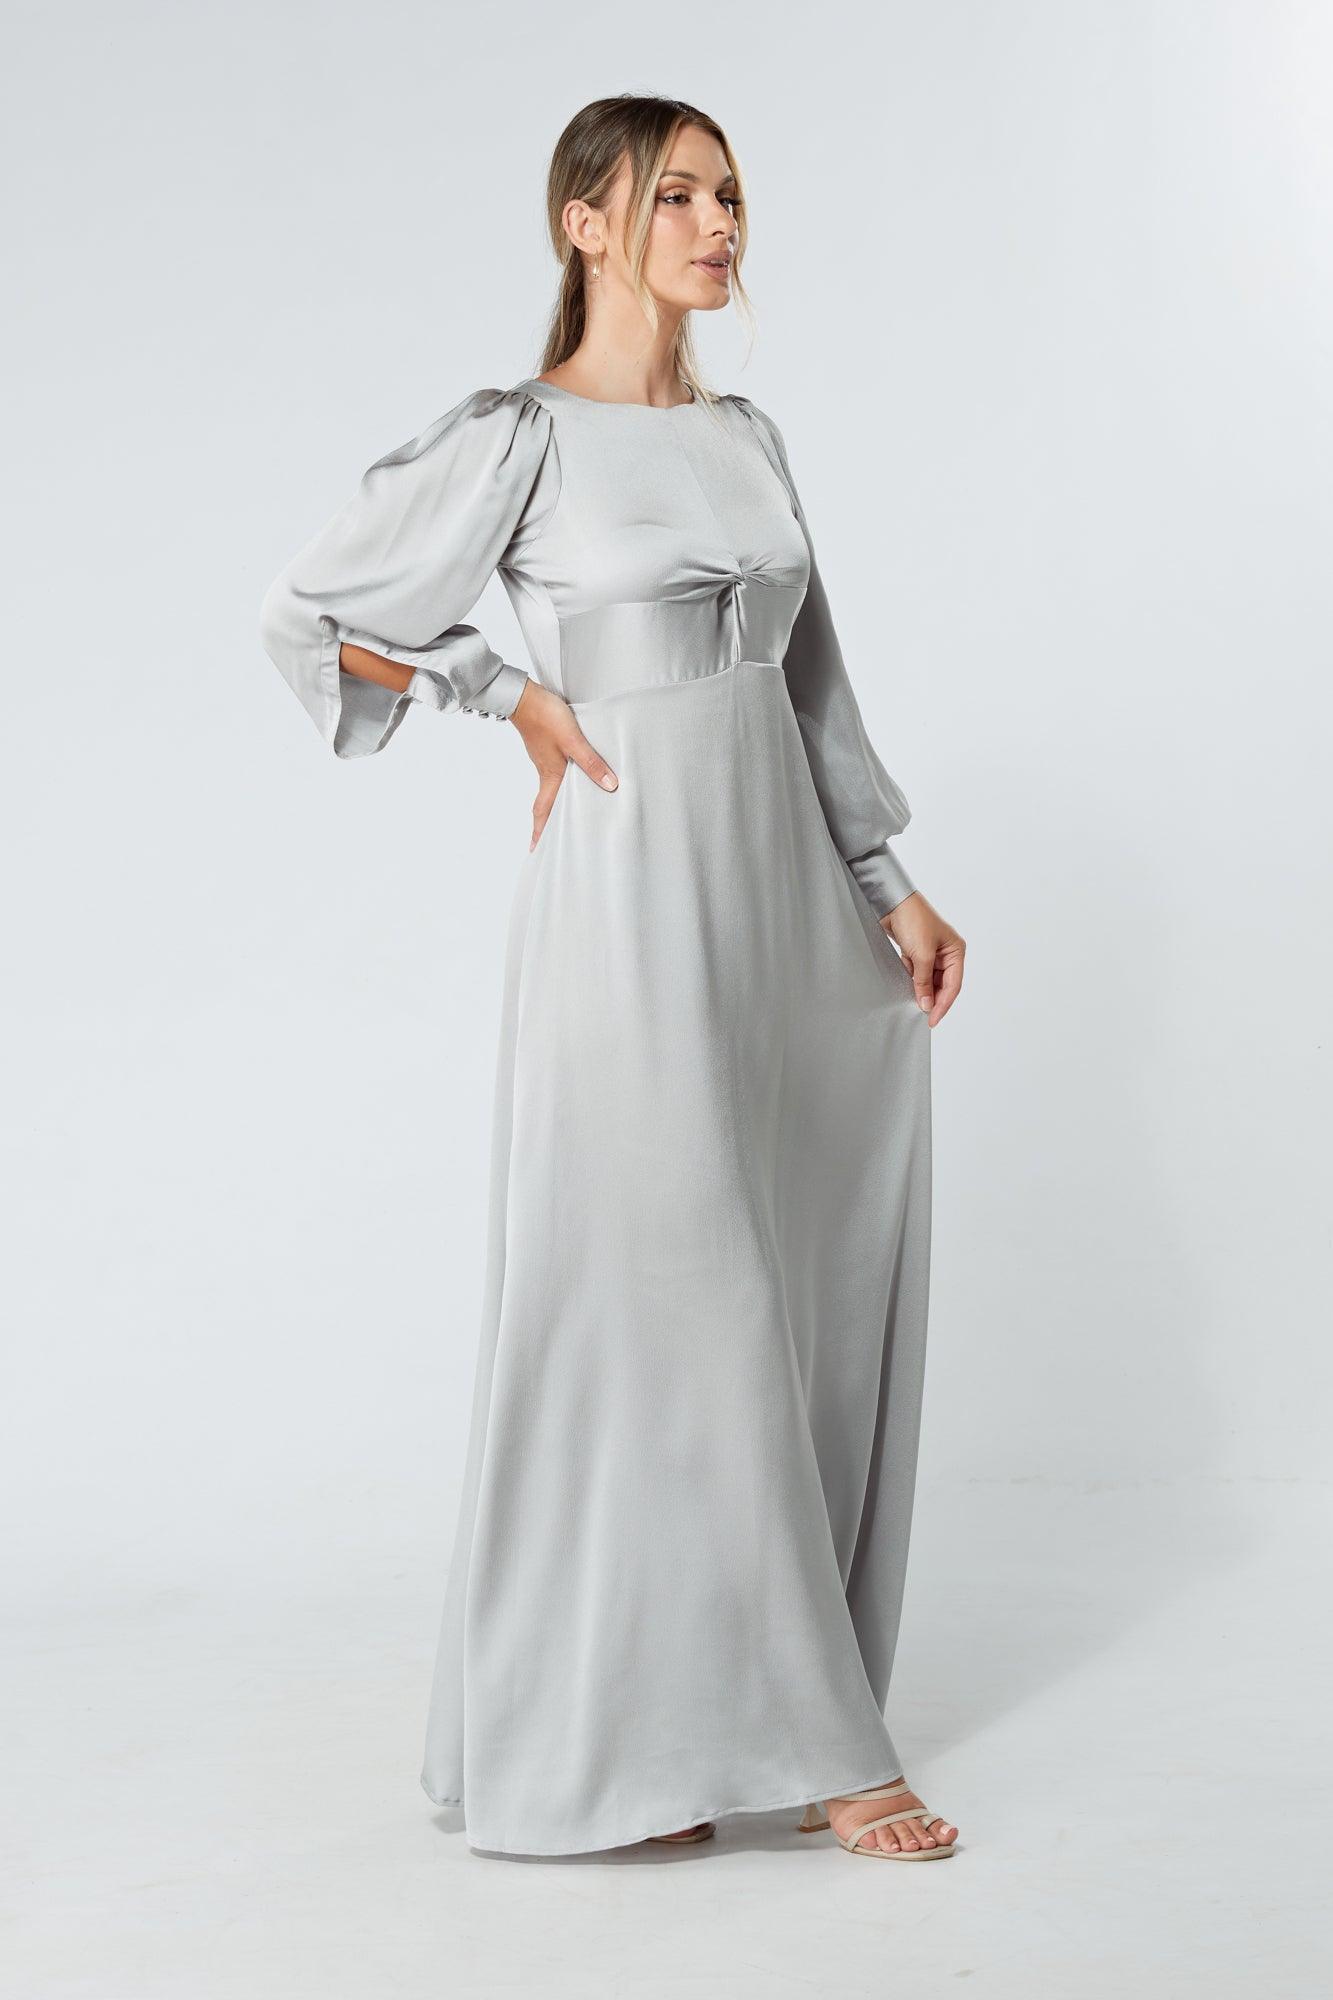 Lila Silver Knotted Front Soft Crepe Maxi Dress - TAHLIRA